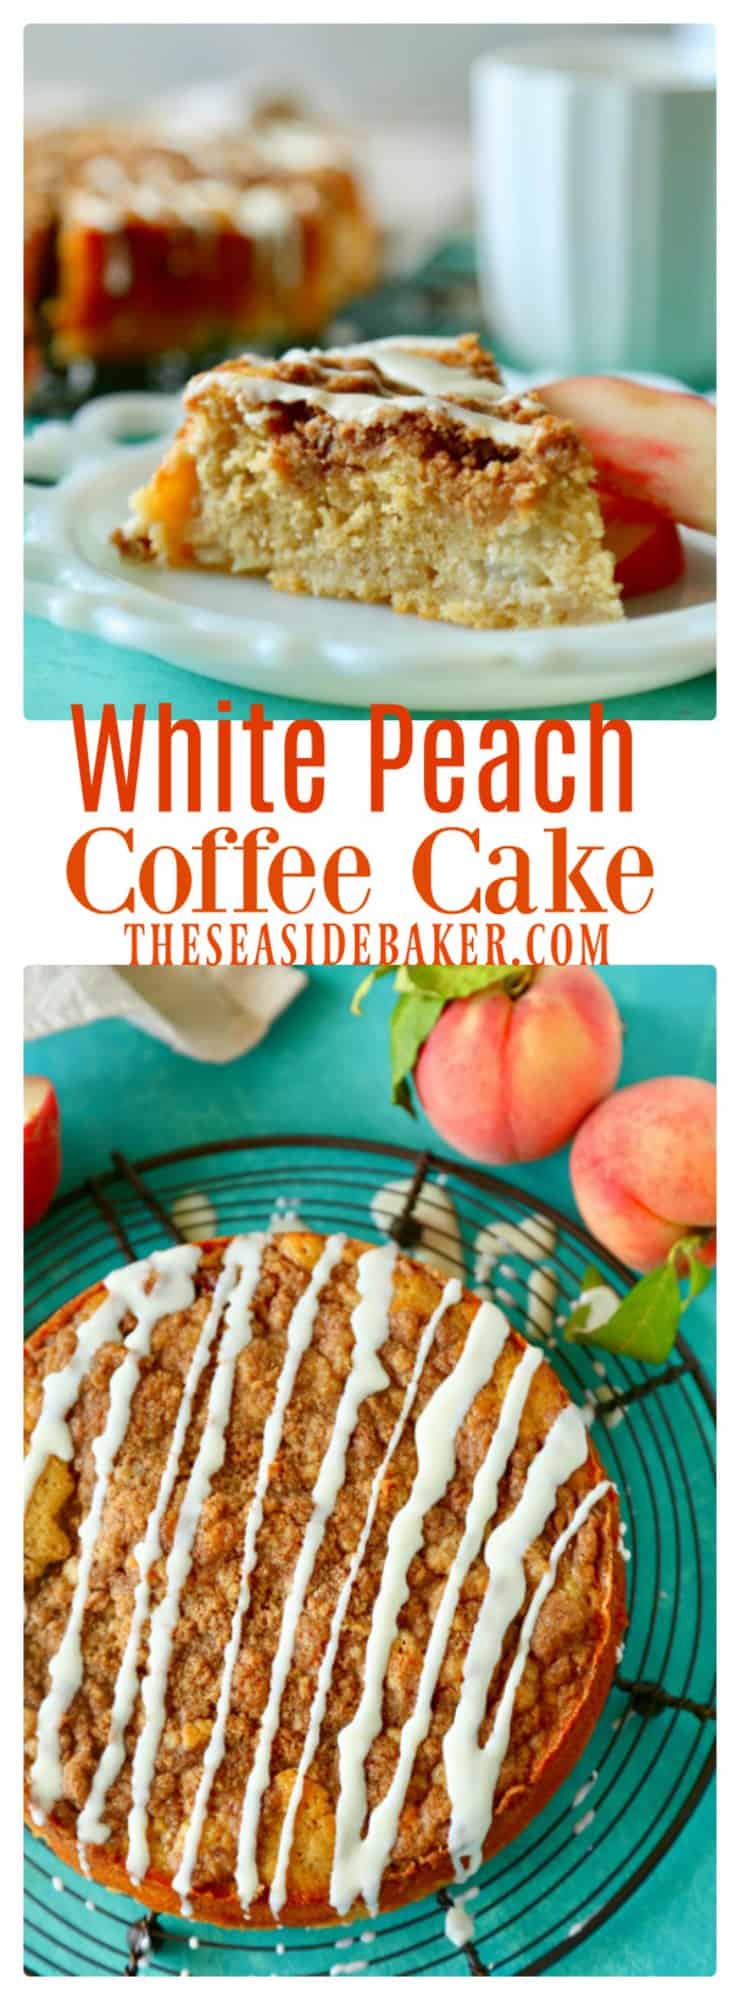 This White Peach Coffee Cake starts with a sweet butter cake studded with fresh peach chunks and topped with a delicious brown sugar crumb topping.